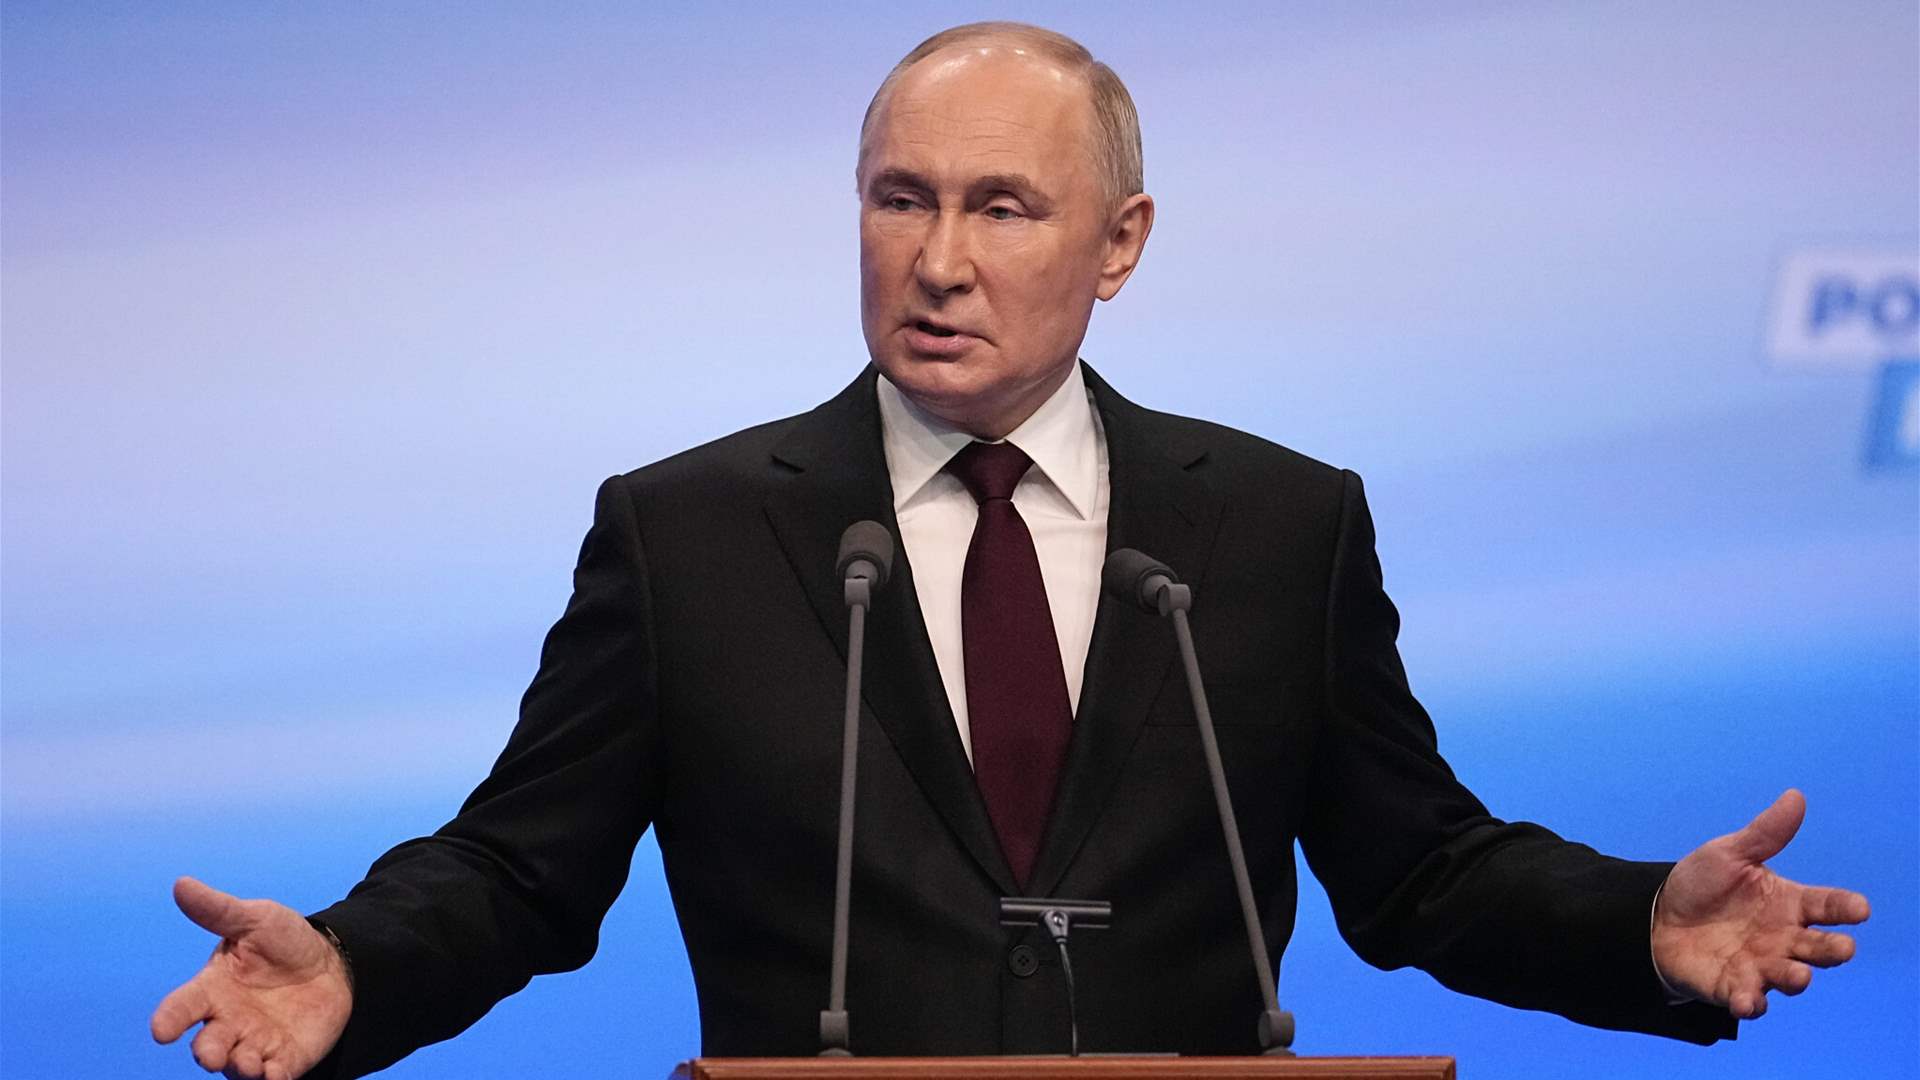 Landslide victory: Putin wins Russian election with no serious competition